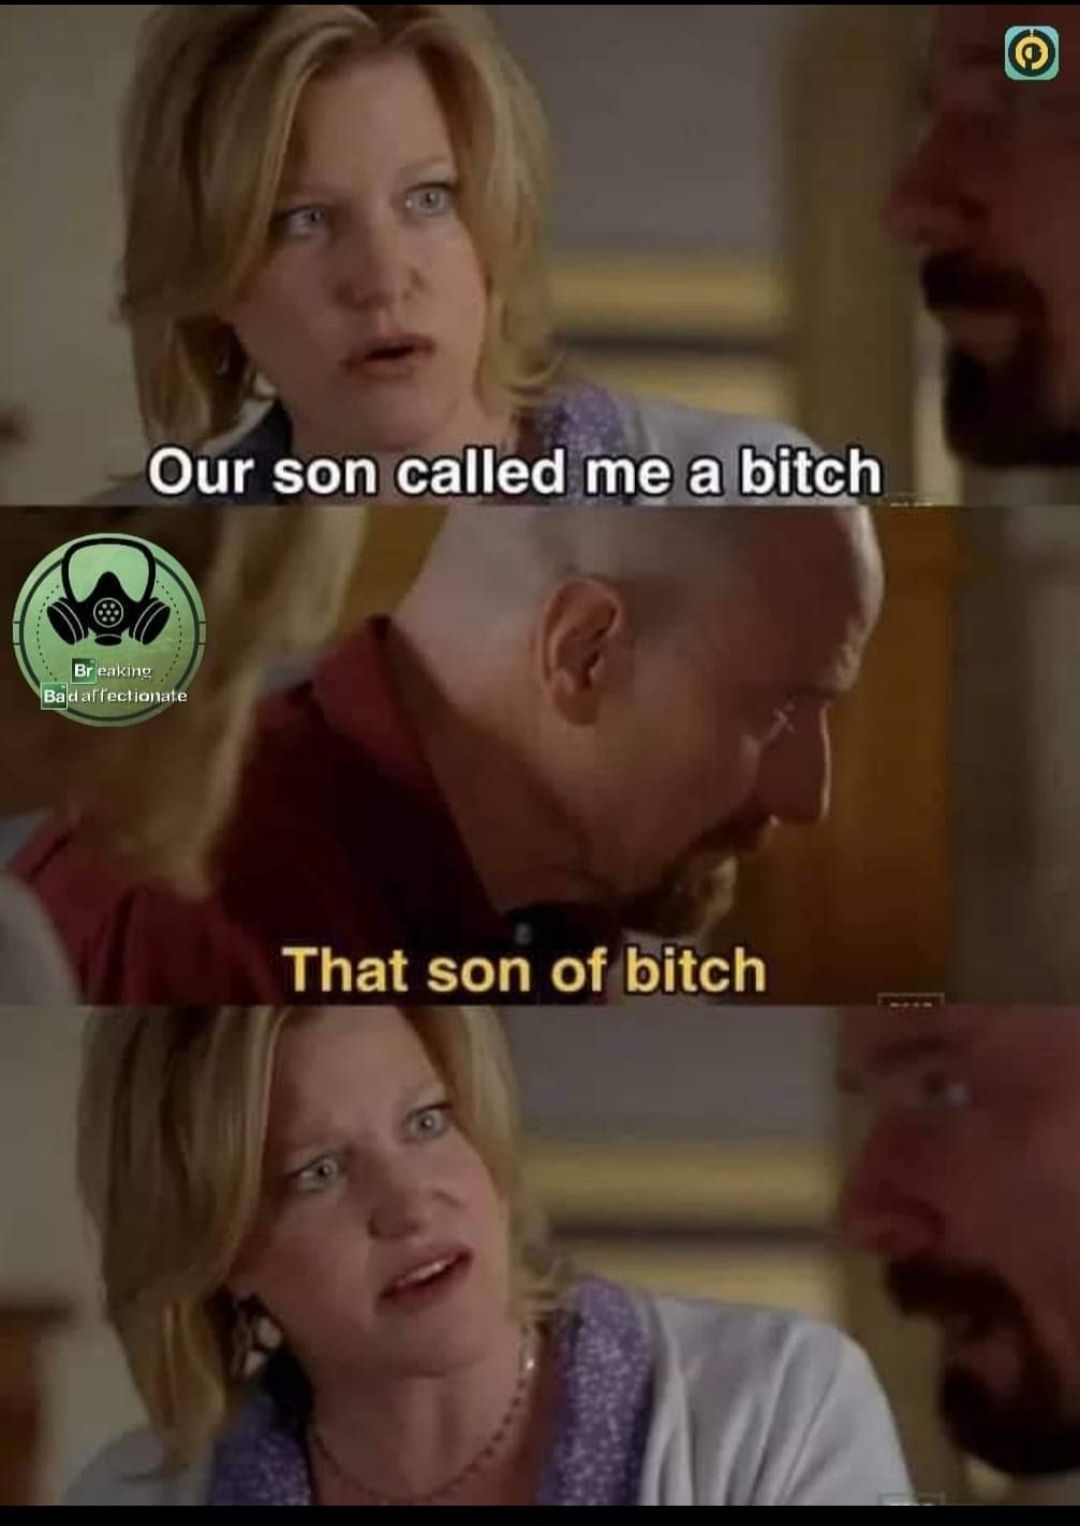 Is this from breaking bad?